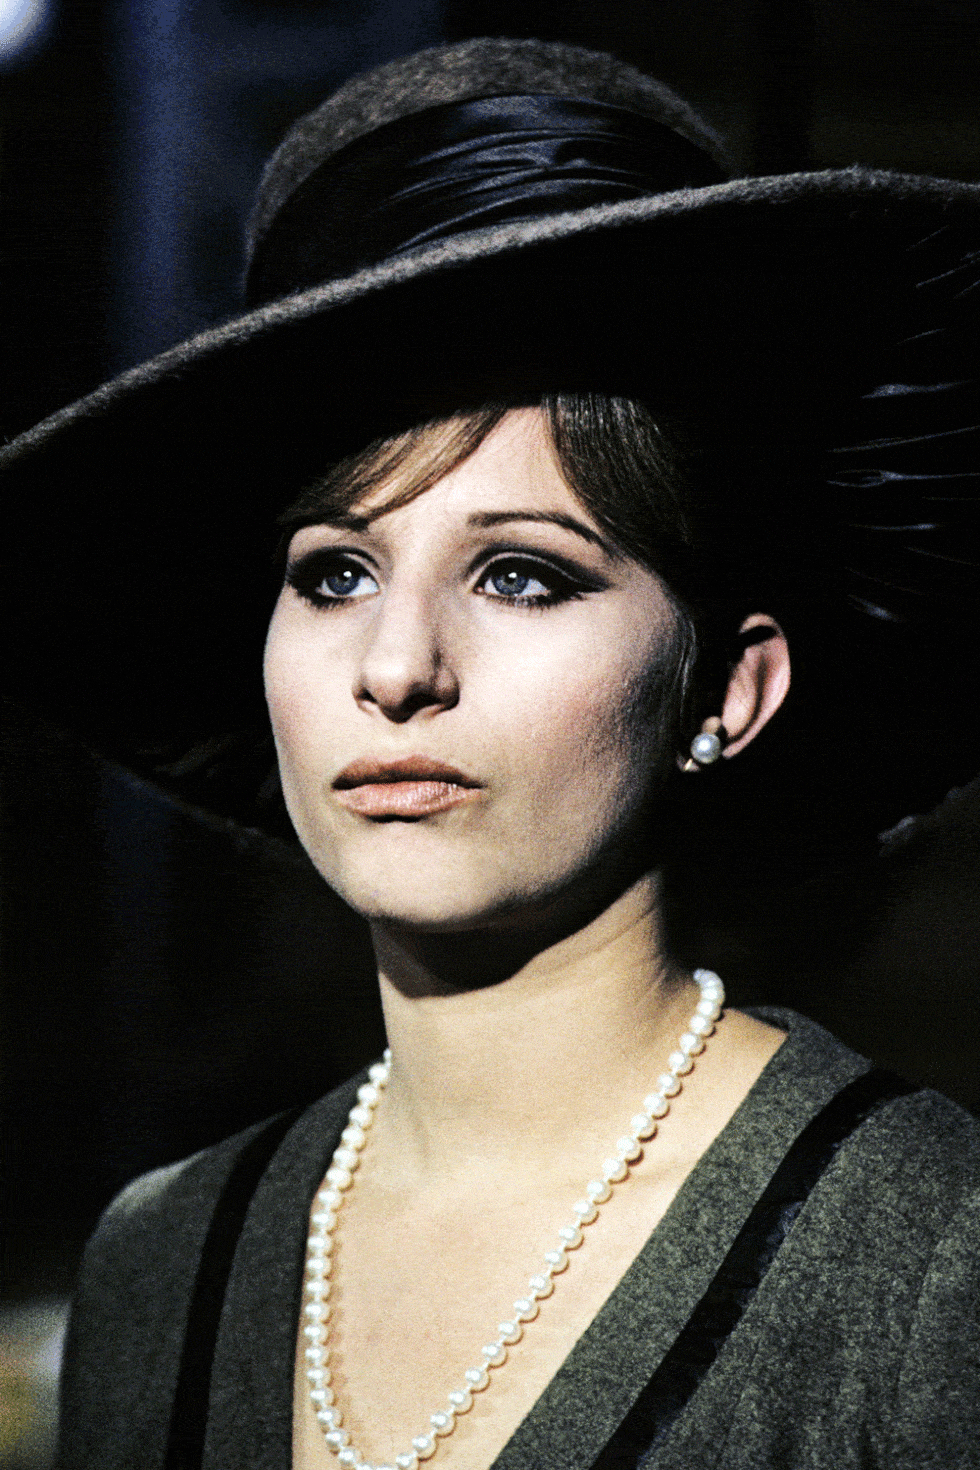 <p>After starring as Fanny Brice on Broadway, Streisand took the role to Hollywood for the movie version of <i>Funny Girl</i>, belting "<a href="https://urldefense.proofpoint.com/v2/url?u=https-3A__www.youtube.com_watch-3Fv-3DaO3Gb5mkwTc&d=CwMFaQ&c=B73tqXN8Ec0ocRmZHMCntw&r=_lVDcfhZeapwSNppss3VUg6RNC_xa8WGYq9yIby-ylo&m=MkyL-1O2lY5MuHwpKFHHnz9pvk1PepJIjON0adHduSs&s=0zm6IVjBjYZH4LK9bvPjbPiHa4TYVJCOwkfjFw6Y5Mo&e=">Don't Rain on My Parade</a>" and earning an Oscar for her incredible performance.</p>